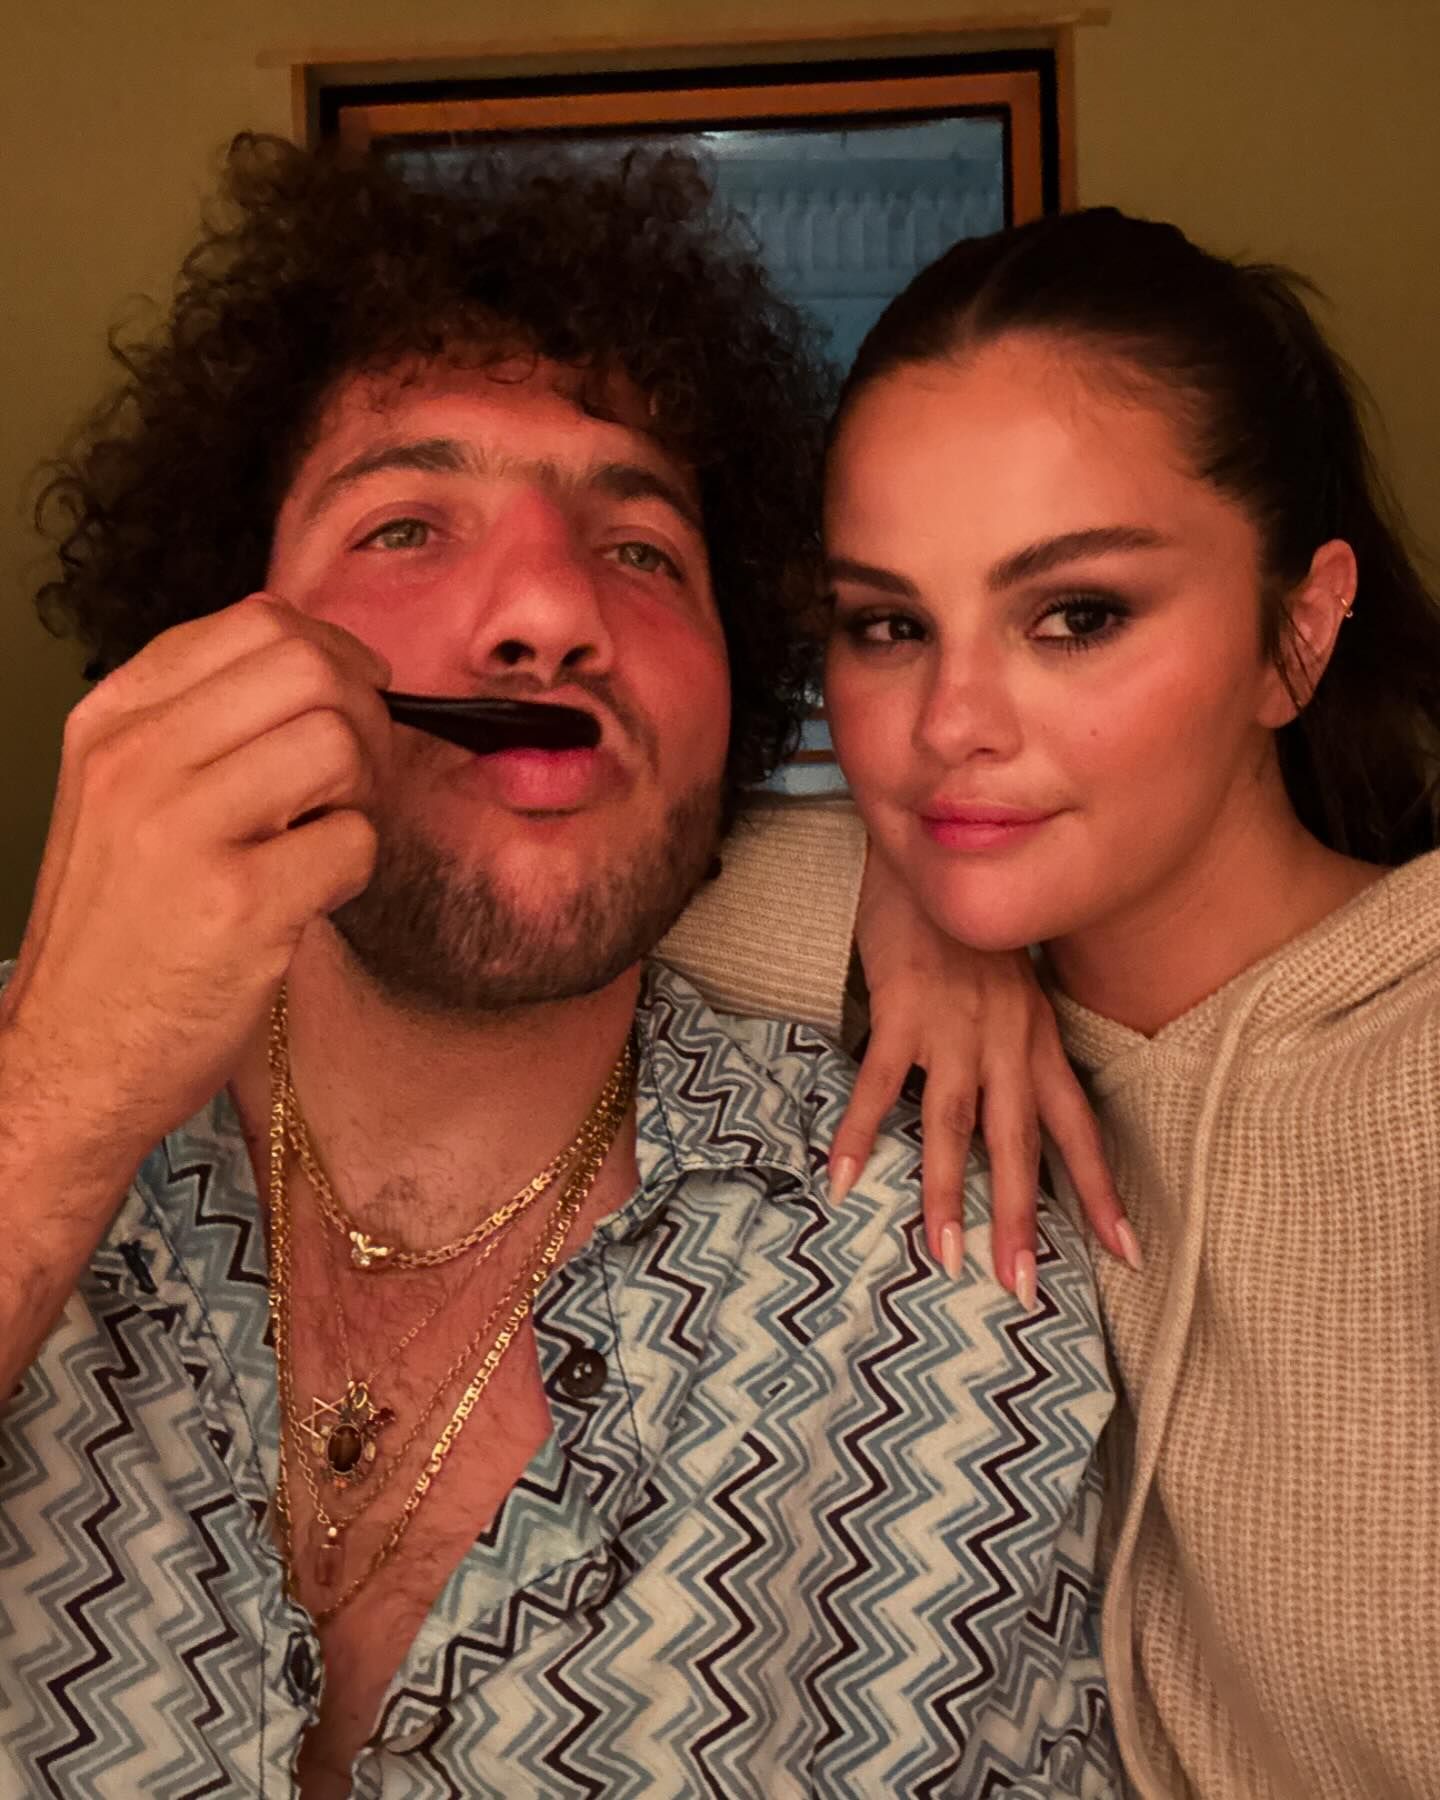 Benny Blanco and Selena Gomez in a recent selfie shared on Selena's Instagram profile